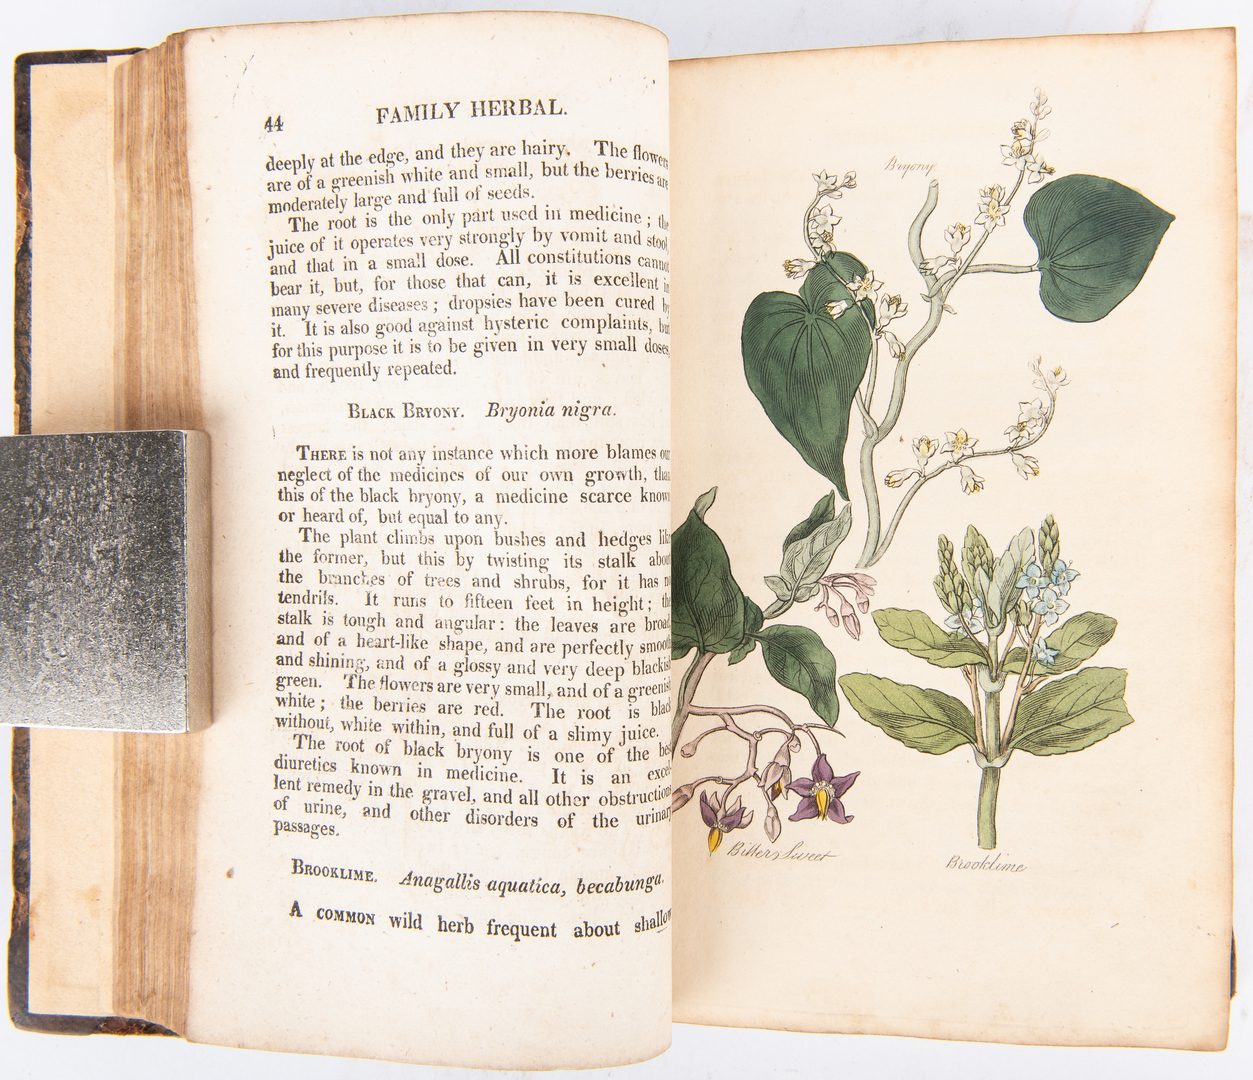 Lot 101: 8 Herbal/Floral Related Books